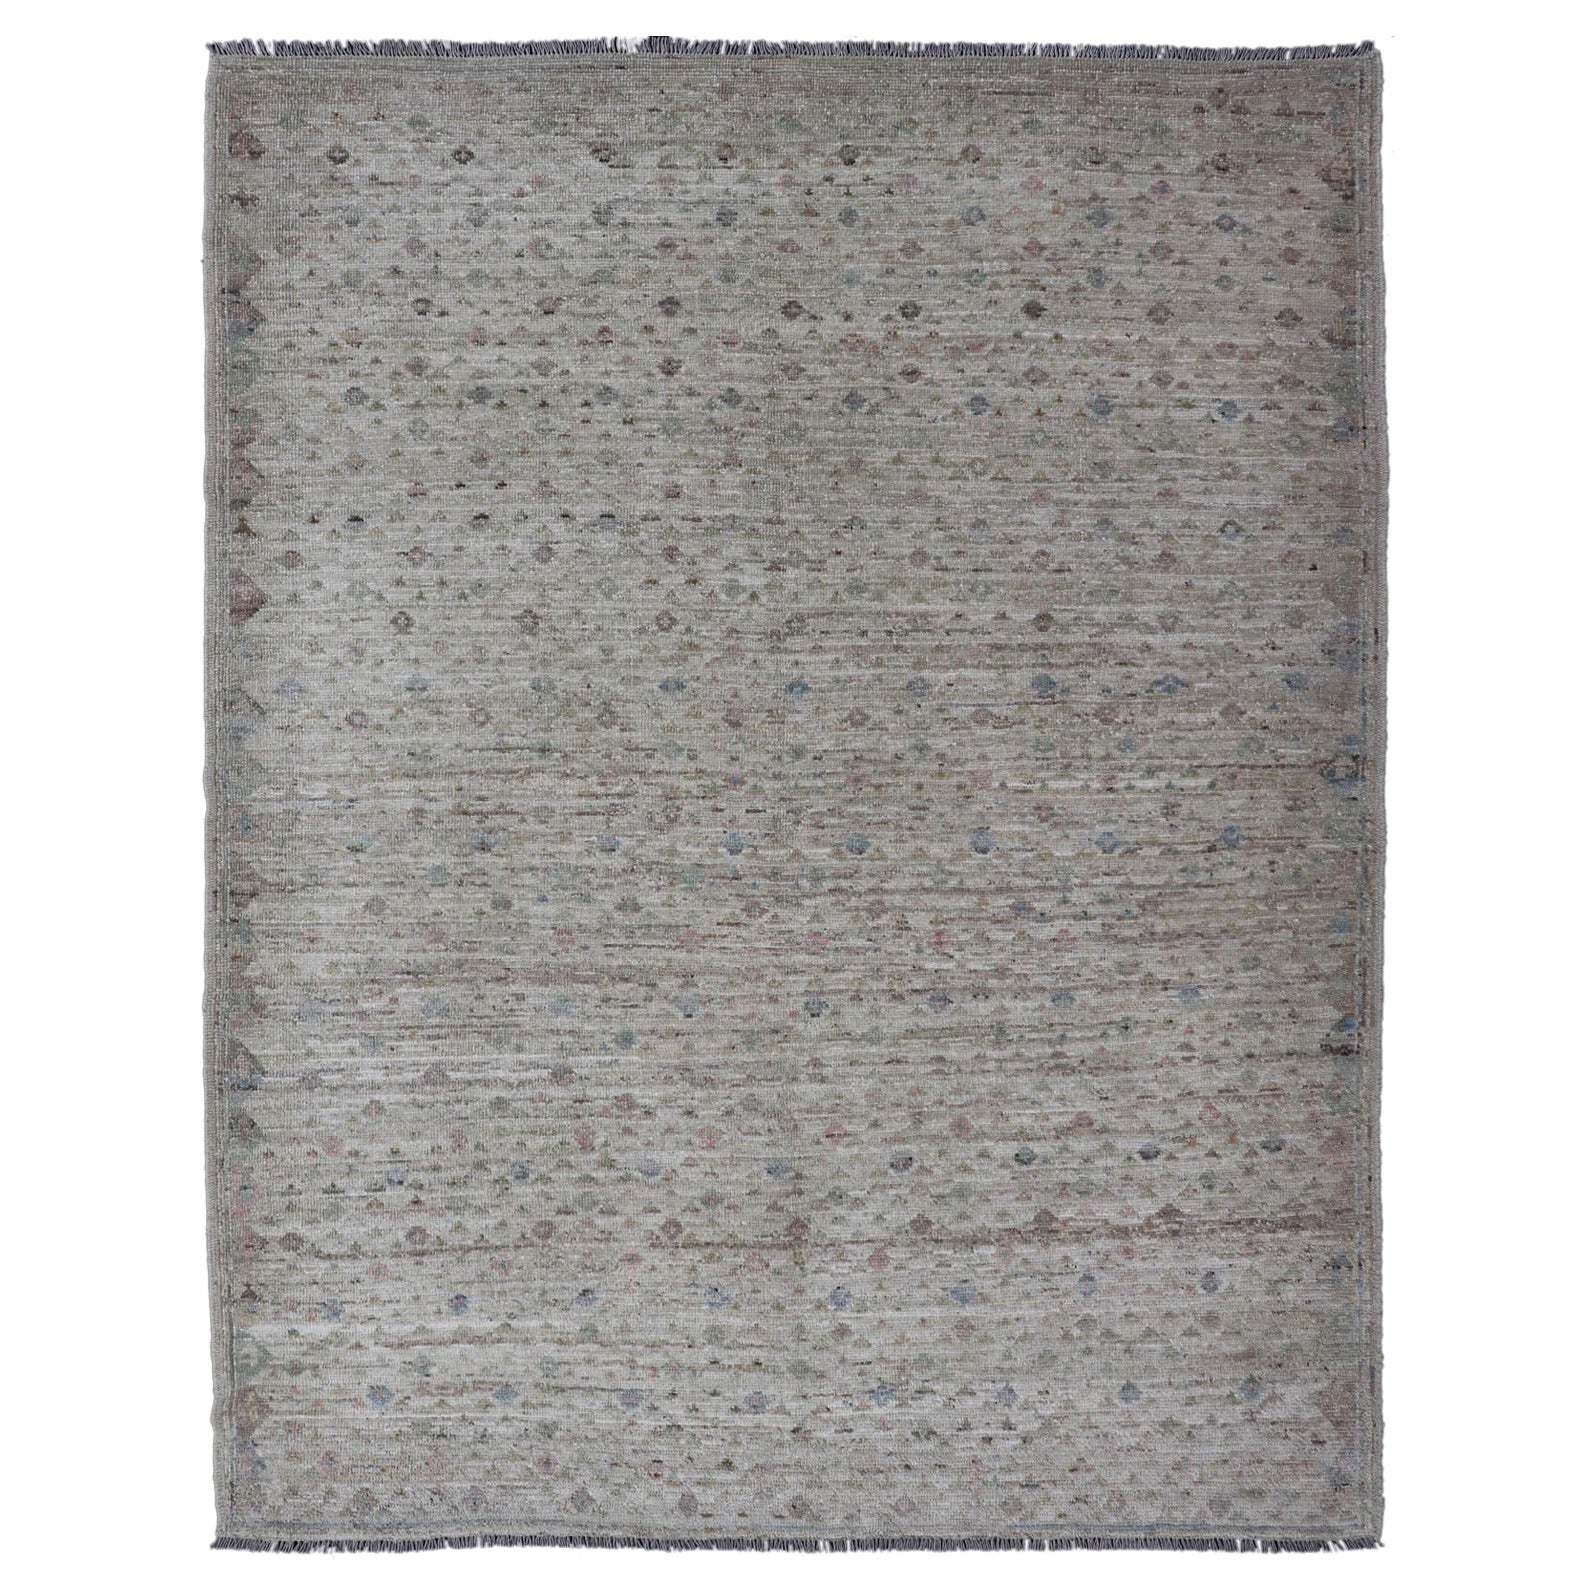 Modern Piled Rug with All-Over Design in Muted Colors and Cream Background